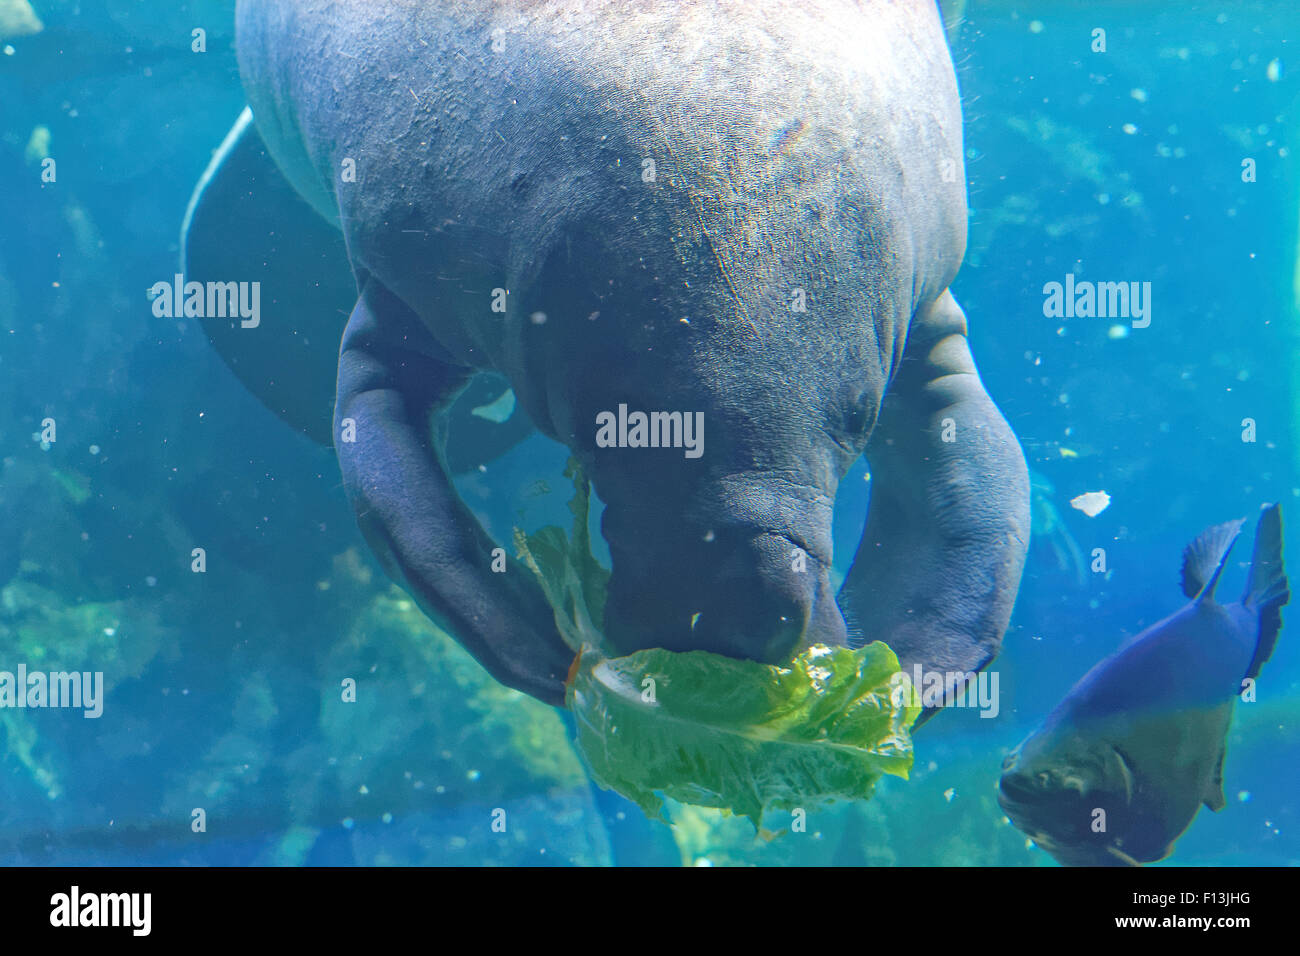 West Indian manatee (Trichechus manatus) or 'sea cow'. Stock Photo